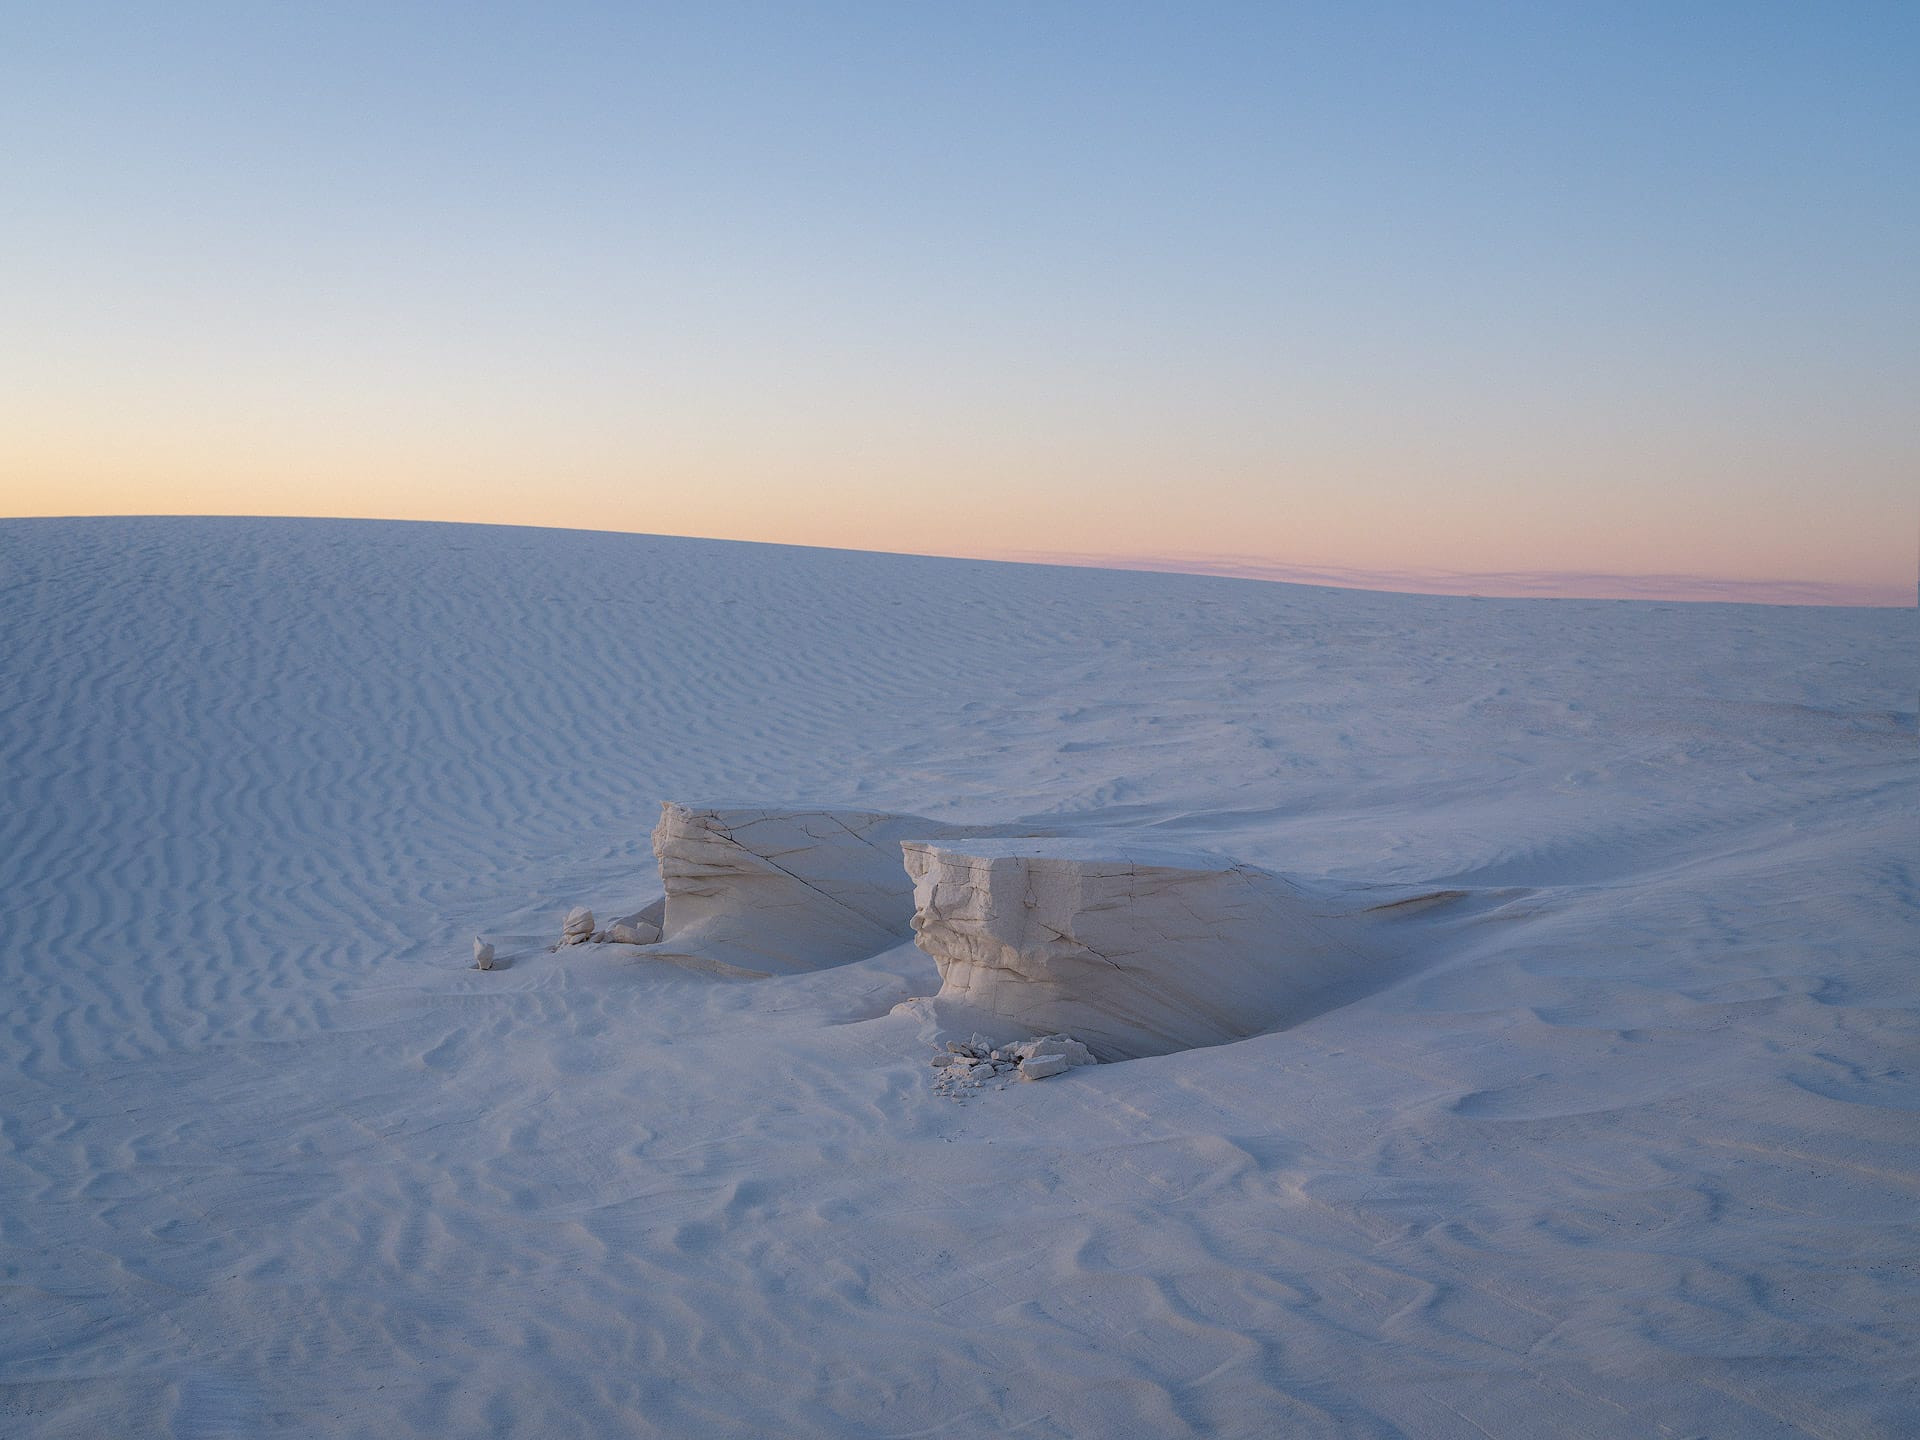 Hardened gypsum rock formations at White Sands National Park